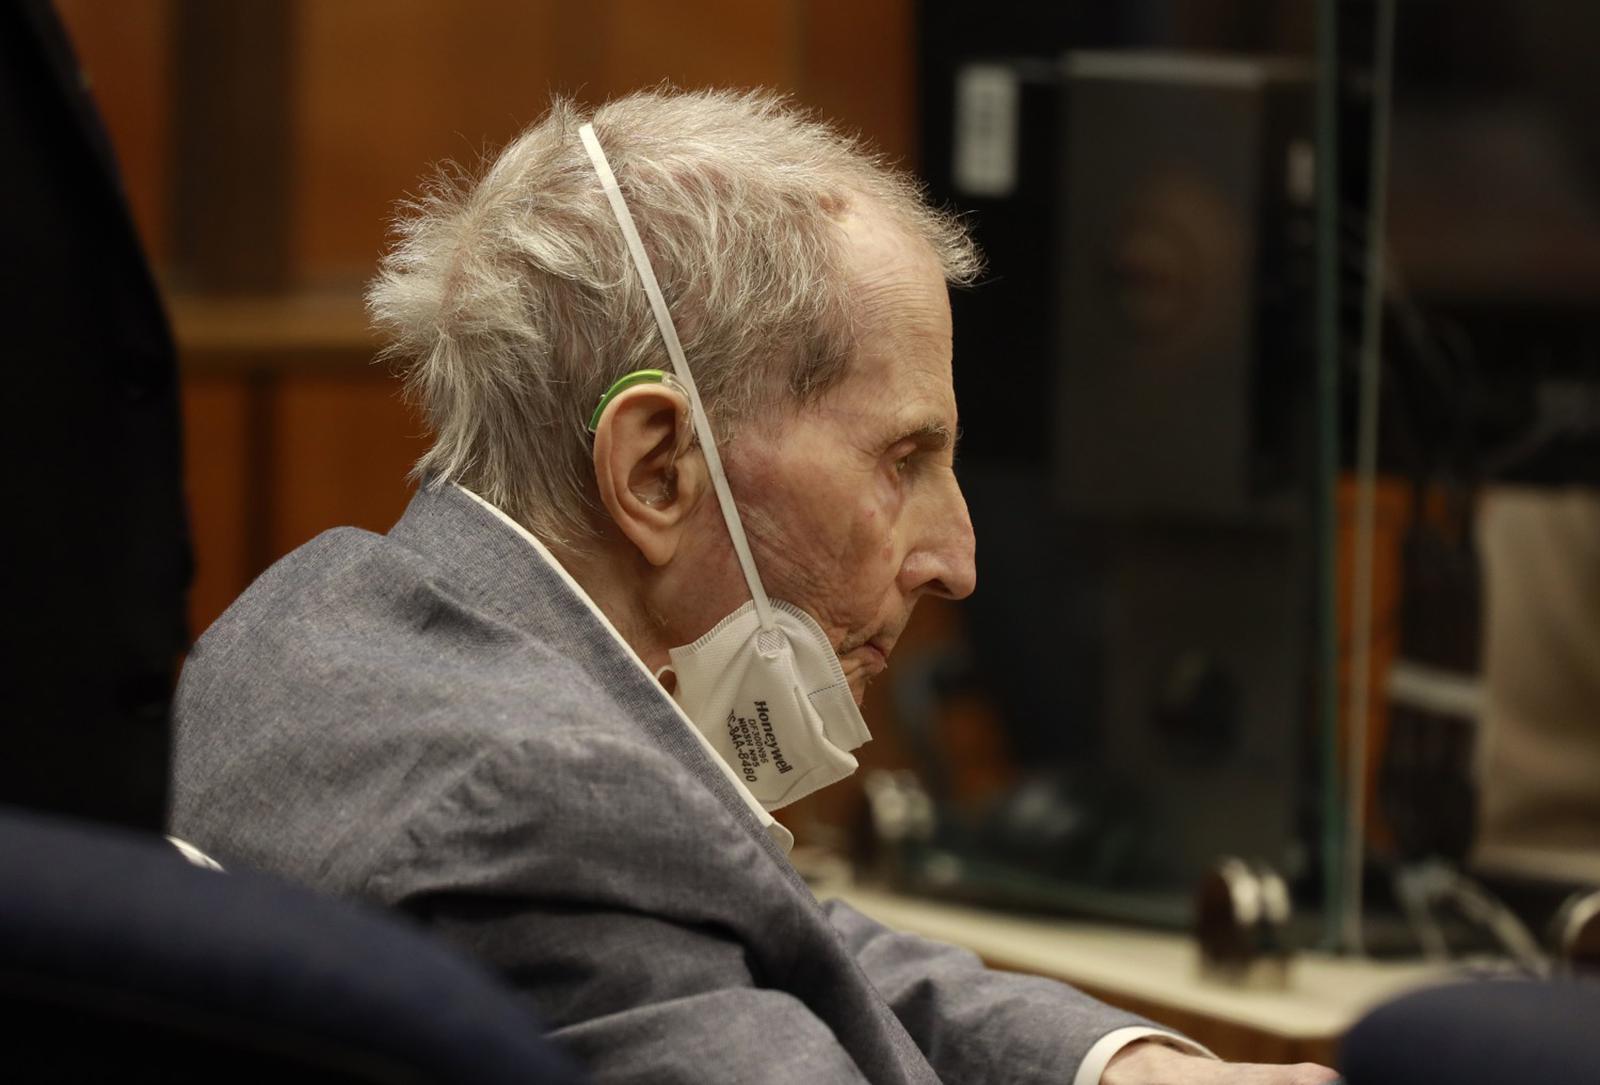 As Robert Durst faces life in prison, NY grand jury to convene in CT college grad's death - New Haven Register